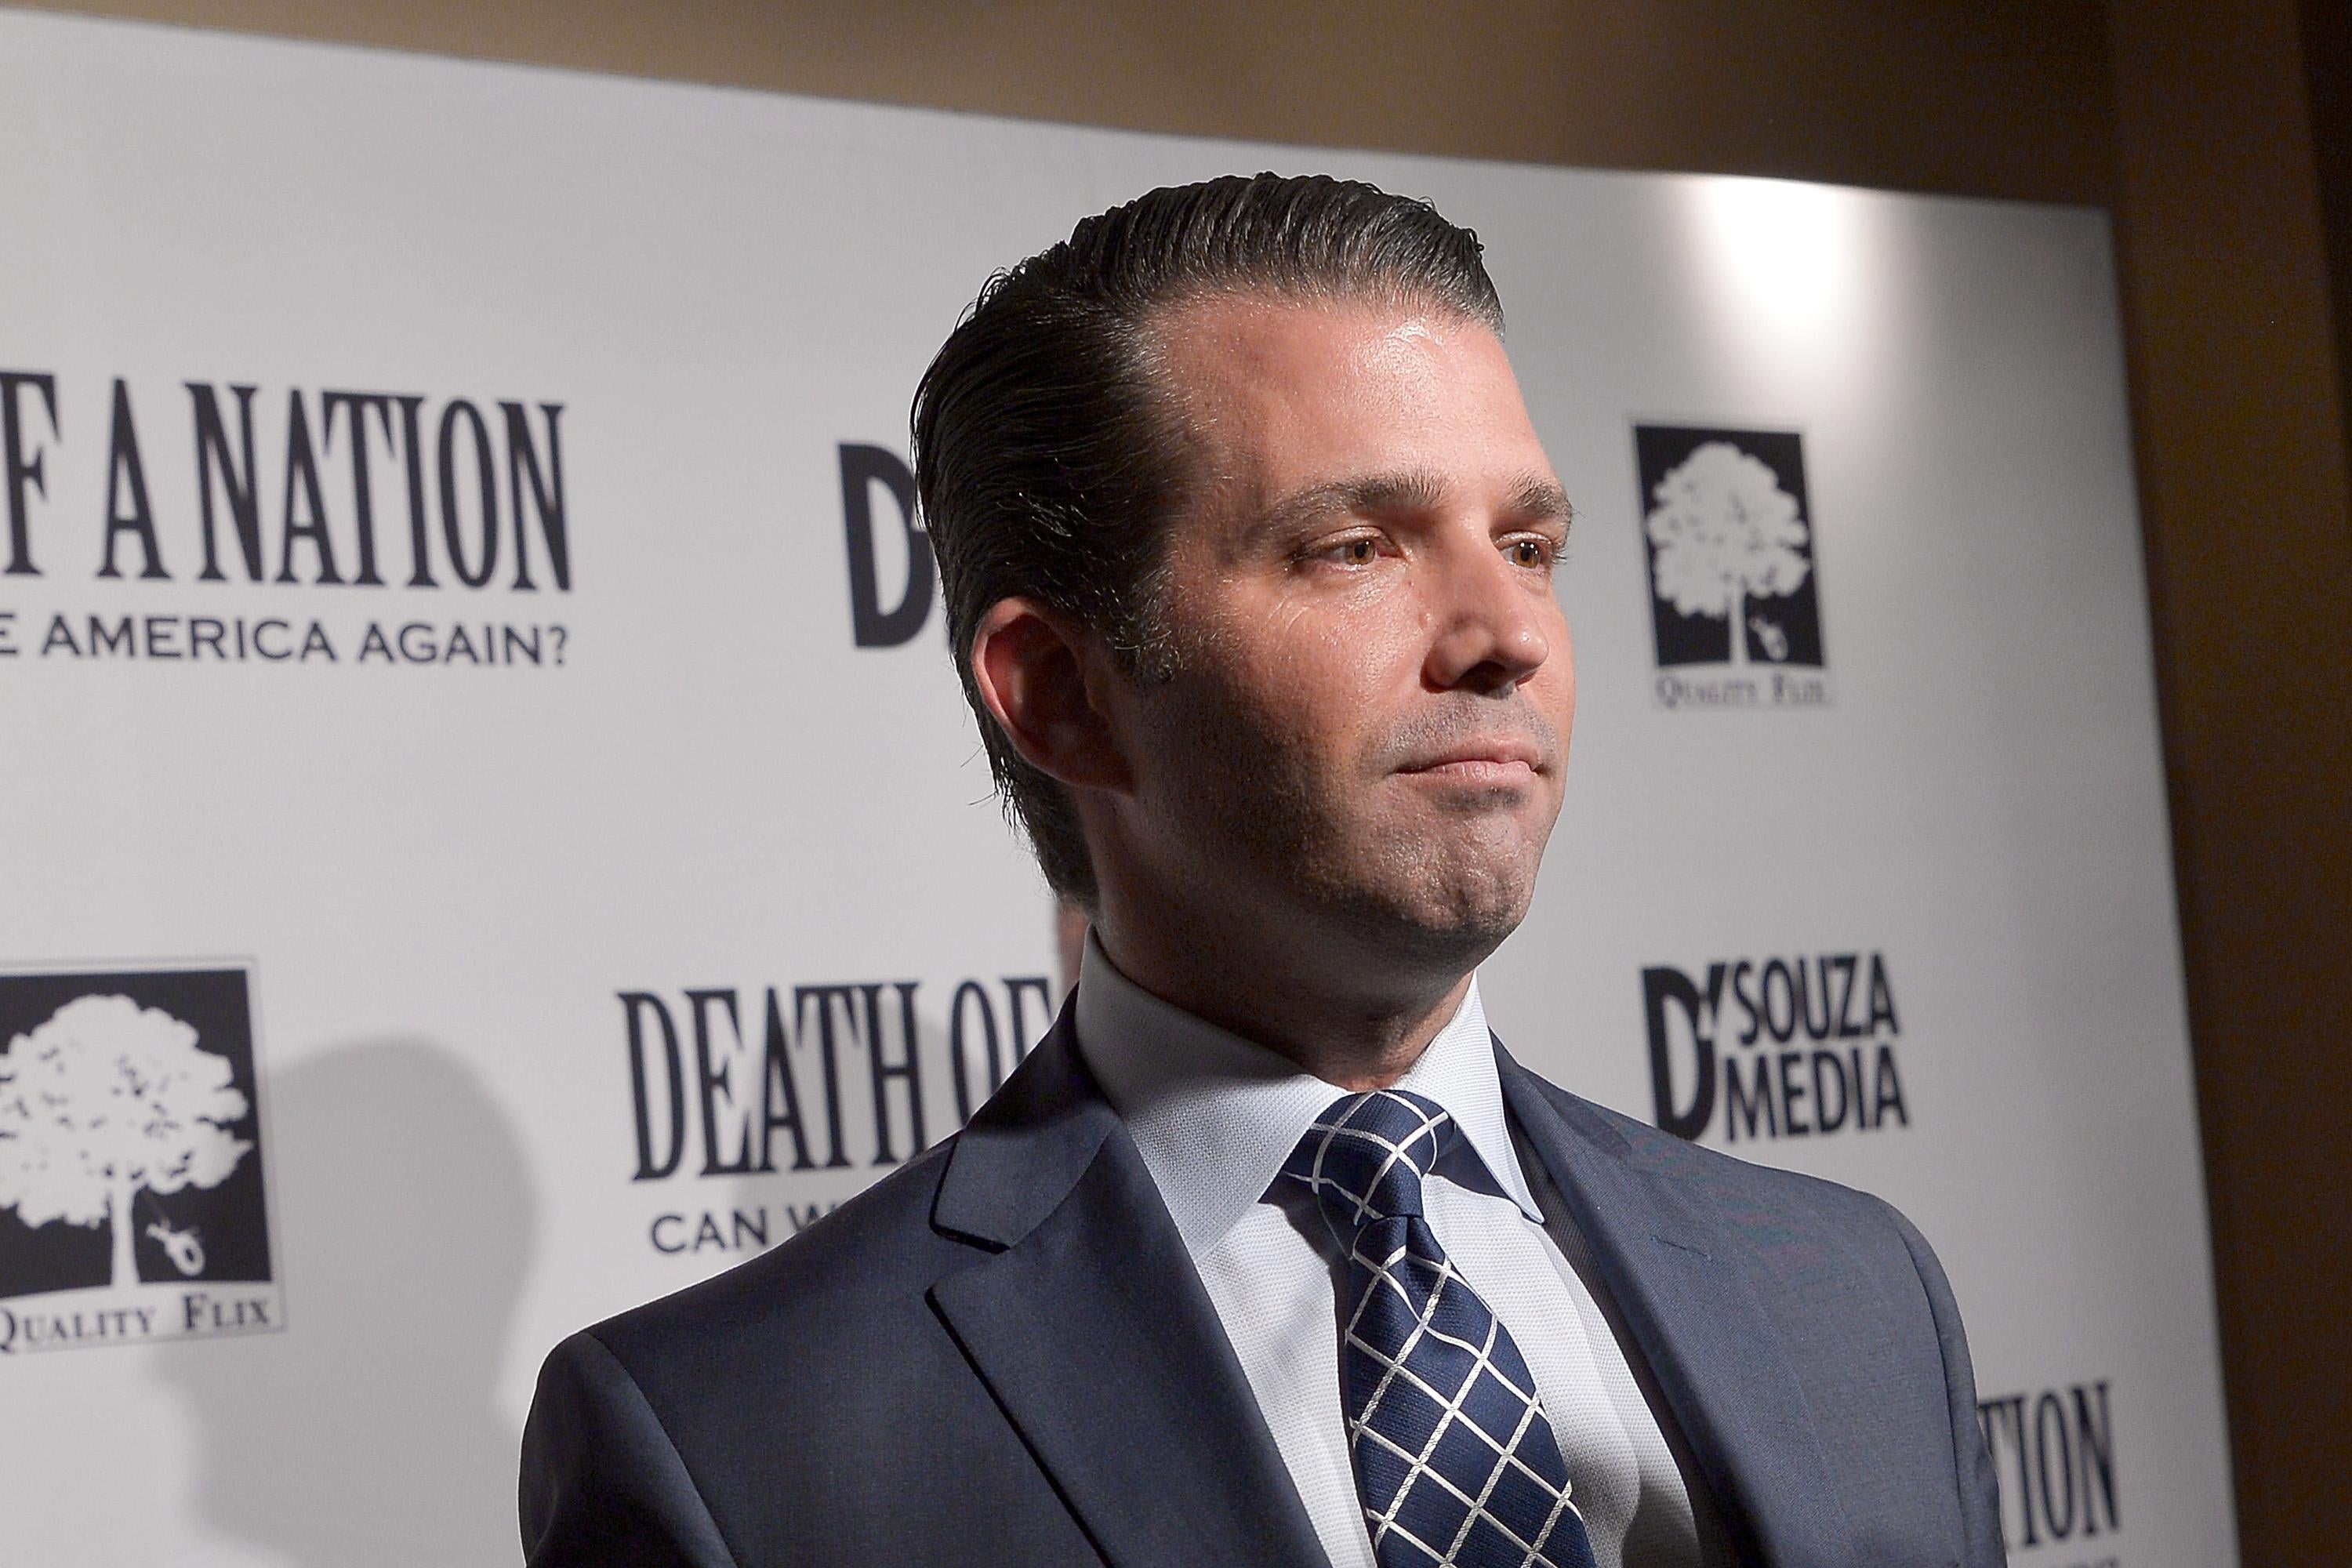 Donald Trump, Jr. attends the DC premiere of the film Death of a Nation at E Street Cinema on August 1, 2018 in Washington, D.C. 